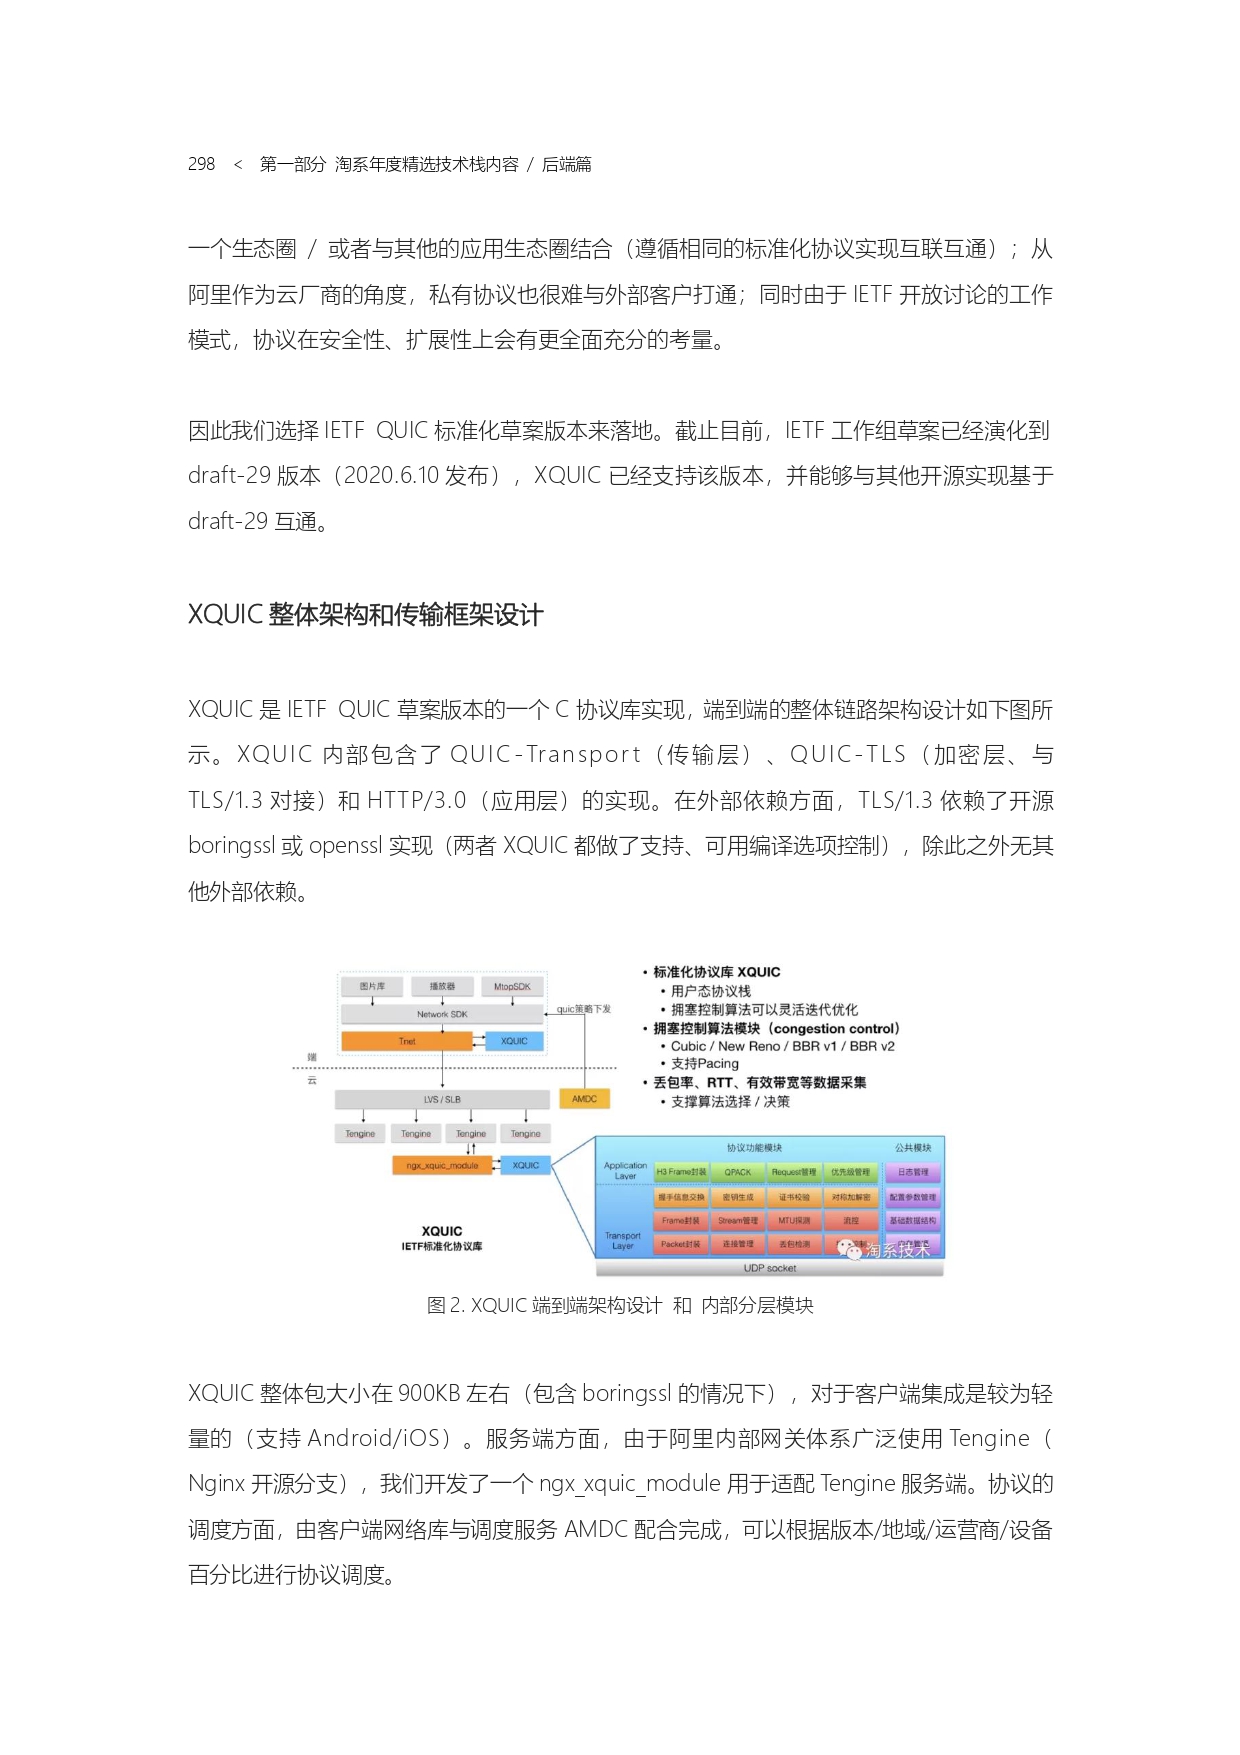 The Complete Works of Tao Technology 2020-1-570_page-0298.jpg